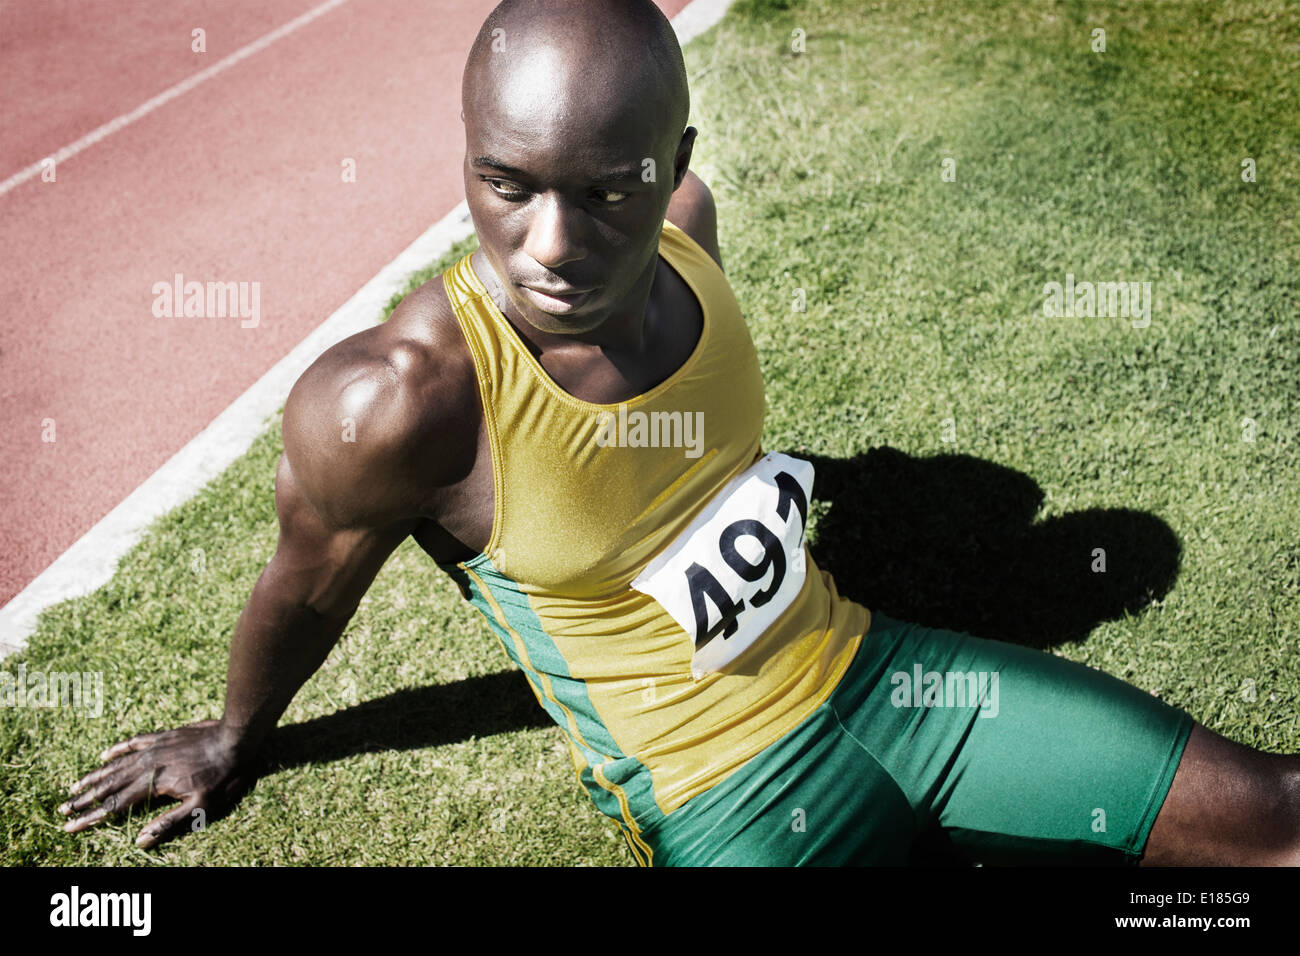 Athlete resting in grass next to running track Stock Photo